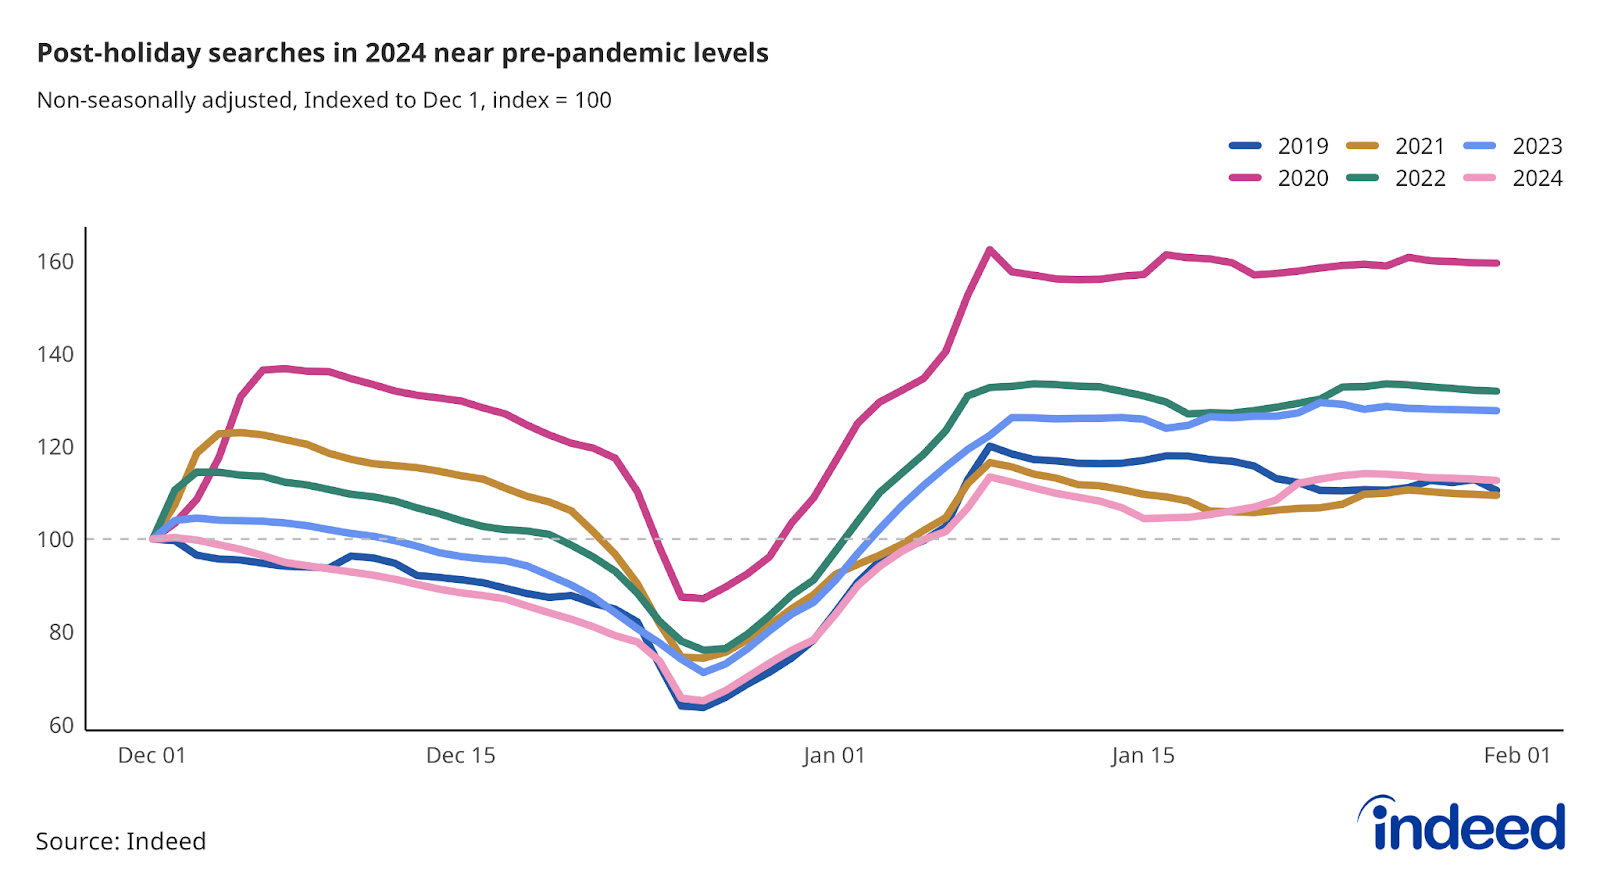  Line chart titled “Post-holiday searches in 2024 near pre-pandemic levels.” With a vertical axis ranging from 60 to 160, Indeed tracked post-holiday job searches along a horizontal axis running from December through January, with different colored lines representing 2019, 2020, 2021, 2022, 2023, and 2024. As of January 31, 2024, searches were 13% higher than on December 1, 2023. 